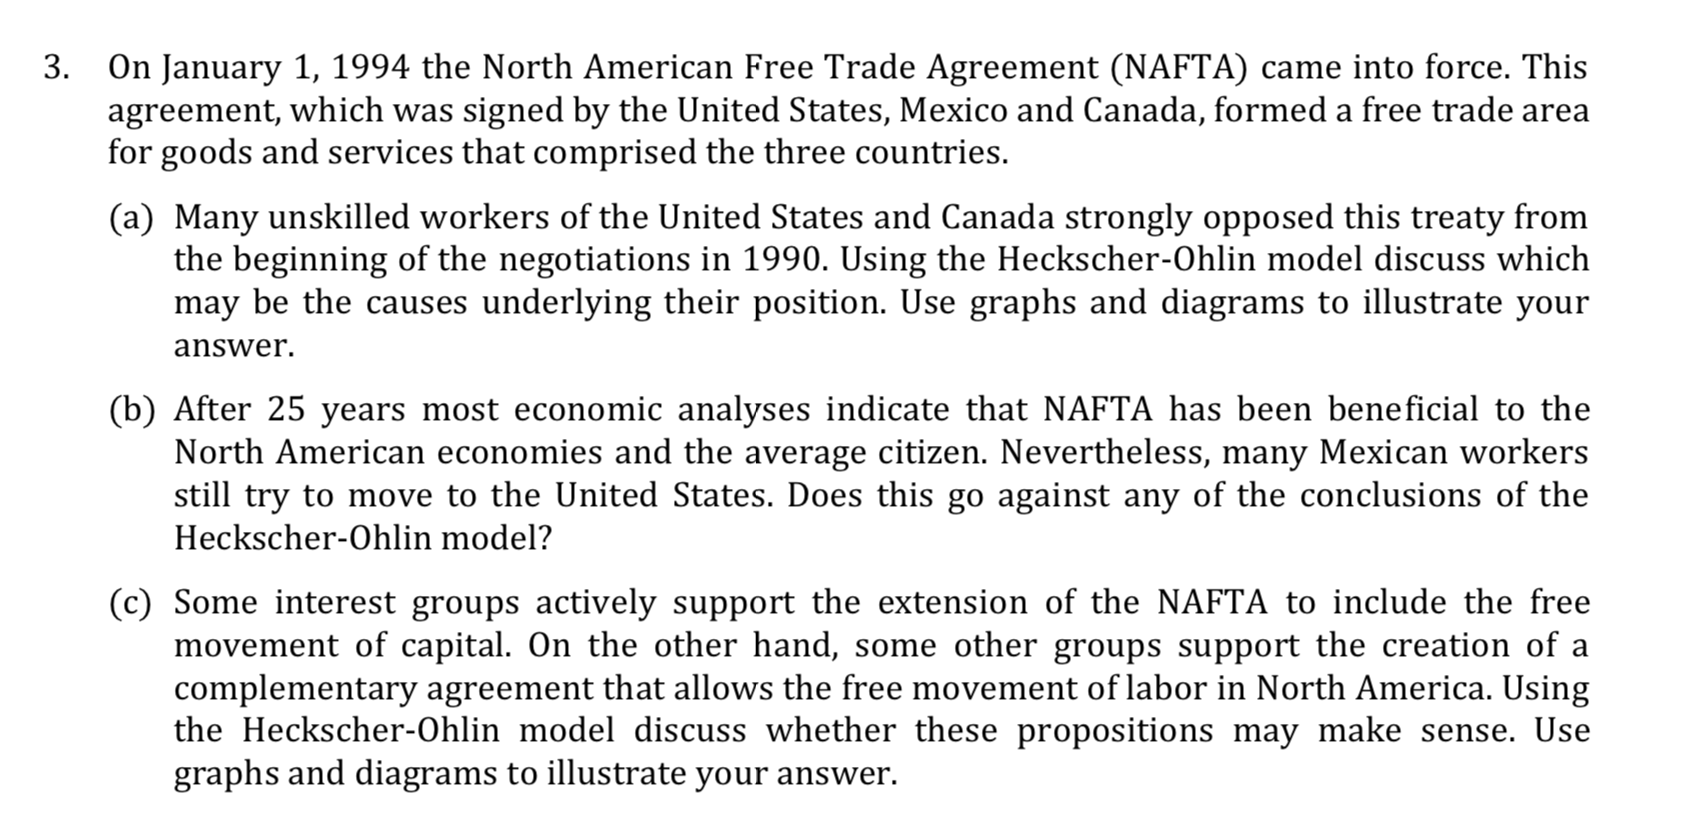 3. On January 1, 1994 the North American Free Trade Agreement (NAFTA) came into force. This
agreement, which was signed by the United States, Mexico and Canada, formed a free trade area
for goods and services that comprised the three countries.
(a) Many unskilled workers of the United States and Canada strongly opposed this treaty from
the beginning of the negotiations in 1990. Using the Heckscher-Ohlin model discuss which
may be the causes underlying their position. Use graphs and diagrams to illustrate your
answer.
(b) After 25 years most economic analyses indicate that NAFTA has been beneficial to the
North American economies and the average citizen. Nevertheless, many Mexican workers
still try to move to the United States. Does this go against any of the conclusions of the
Heckscher-Ohlin model?
(c) Some interest groups actively support the extension of the NAFTA to include the free
movement of capital. On the other hand, some other groups support the creation of a
complementary agreement that allows the free movement of labor in North America. Using
the Heckscher-Ohlin model discuss whether these propositions may make sense. Use
graphs and diagrams to illustrate your answer.
